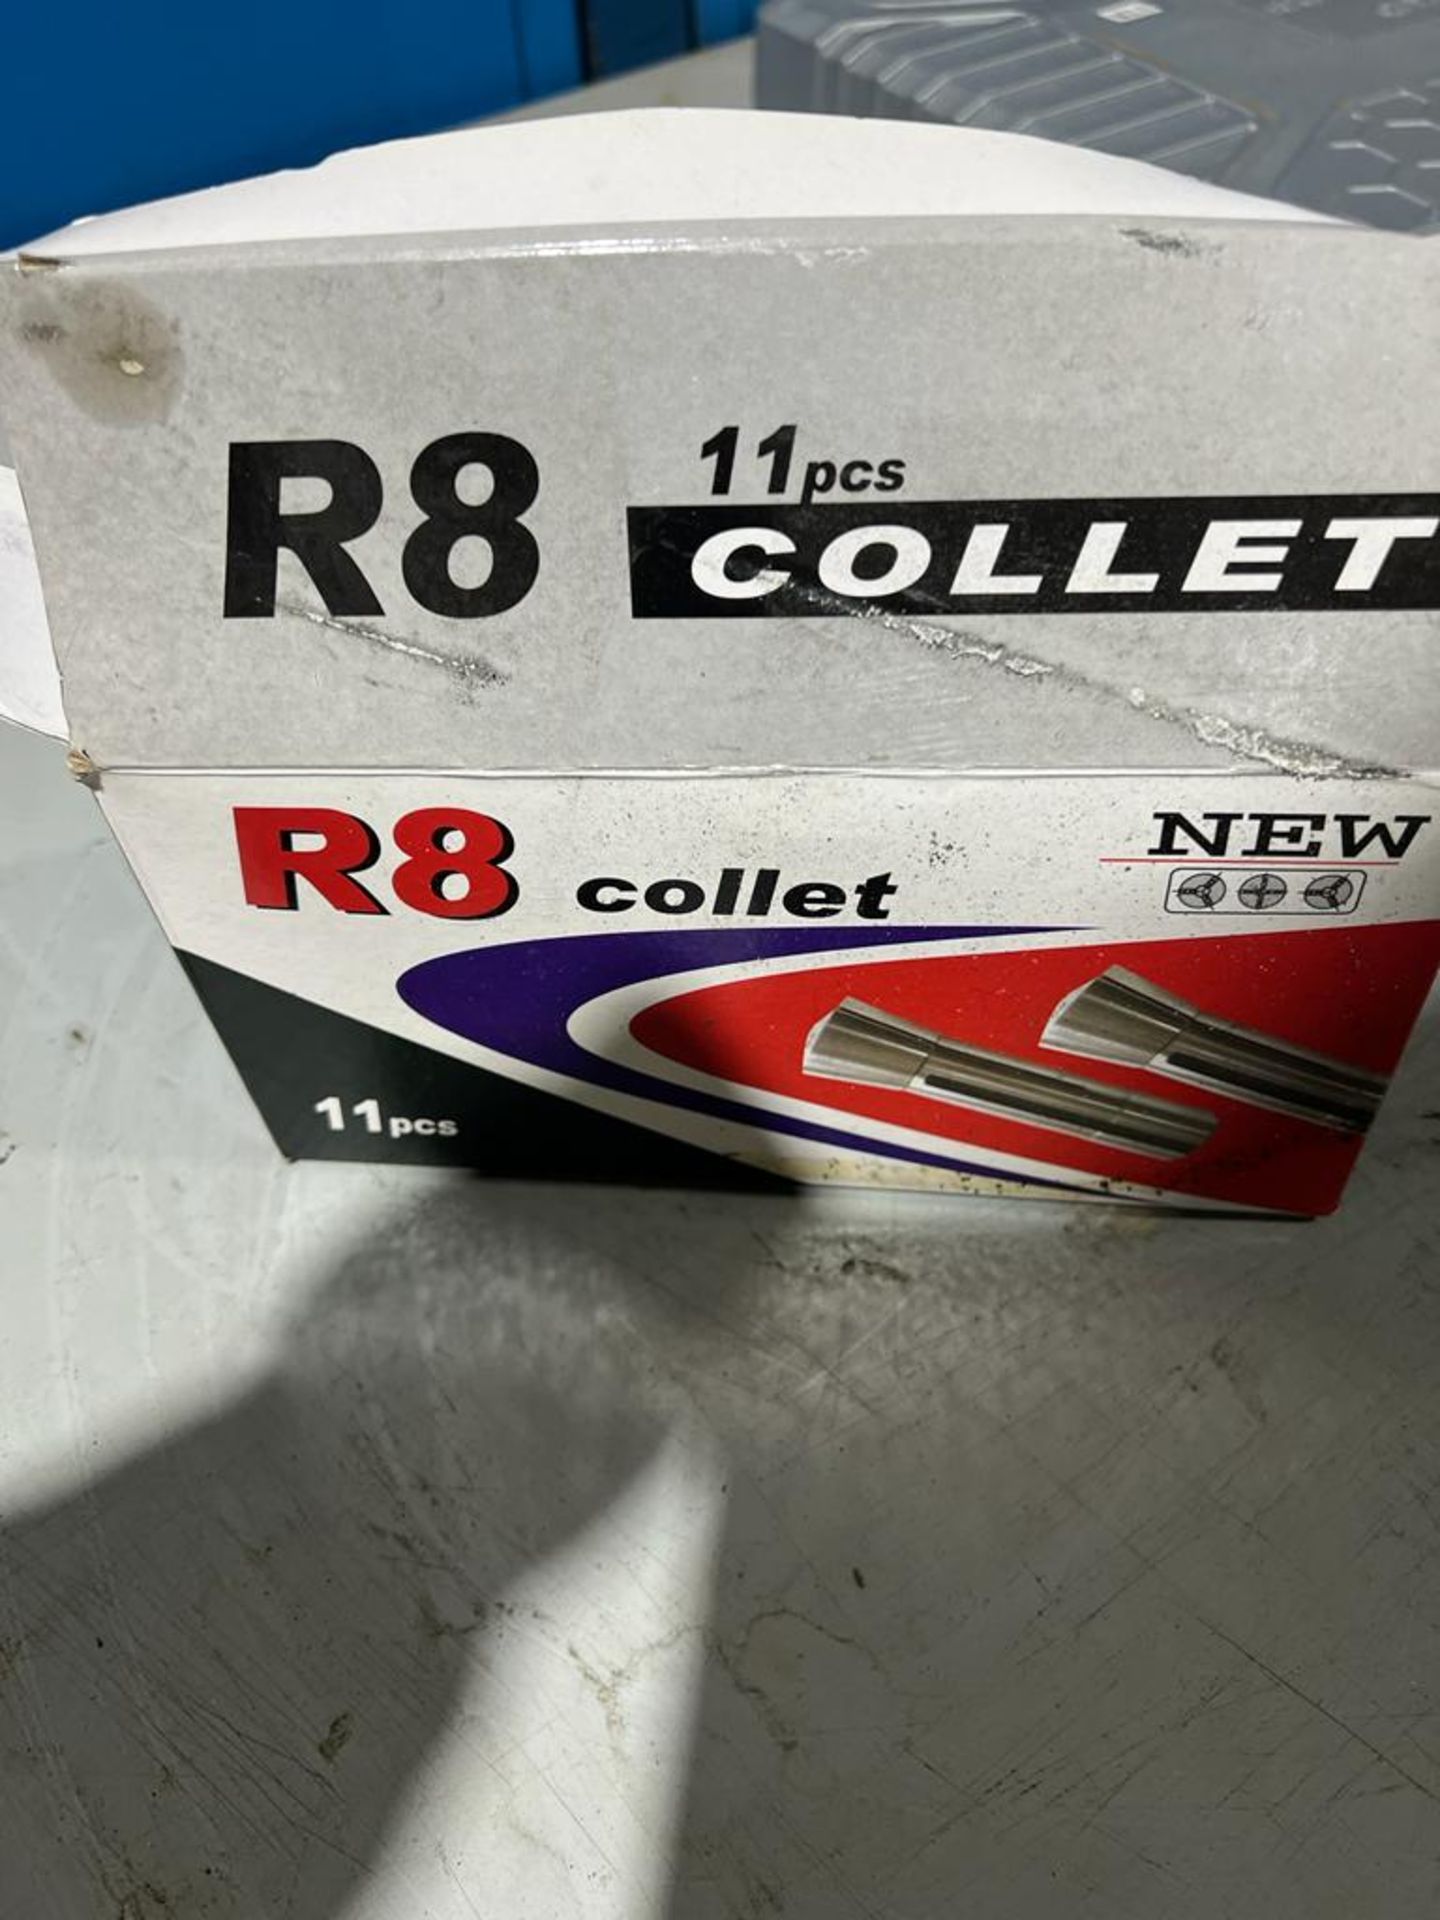 R8 Collet Set with 11 pieces - new in box - Image 2 of 2